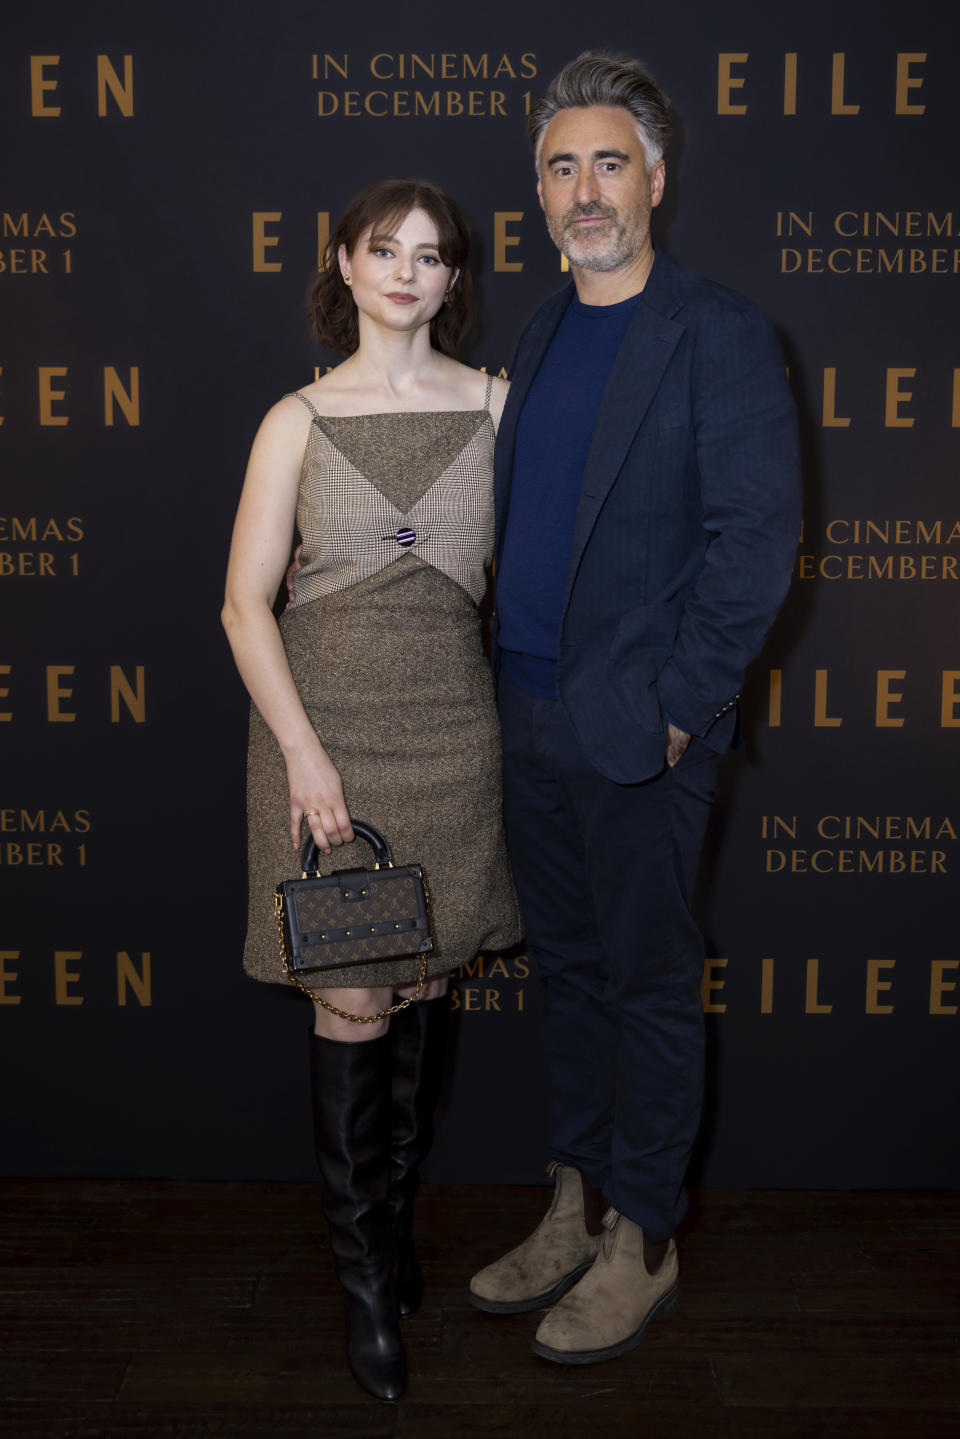 Thomasin McKenzie, left, and William Oldroyd pose for photographers upon arrival at the screening of the film 'Eileen' in London Monday, Nov. 13, 2021. (Photo by Vianney Le Caer/Invision/AP)